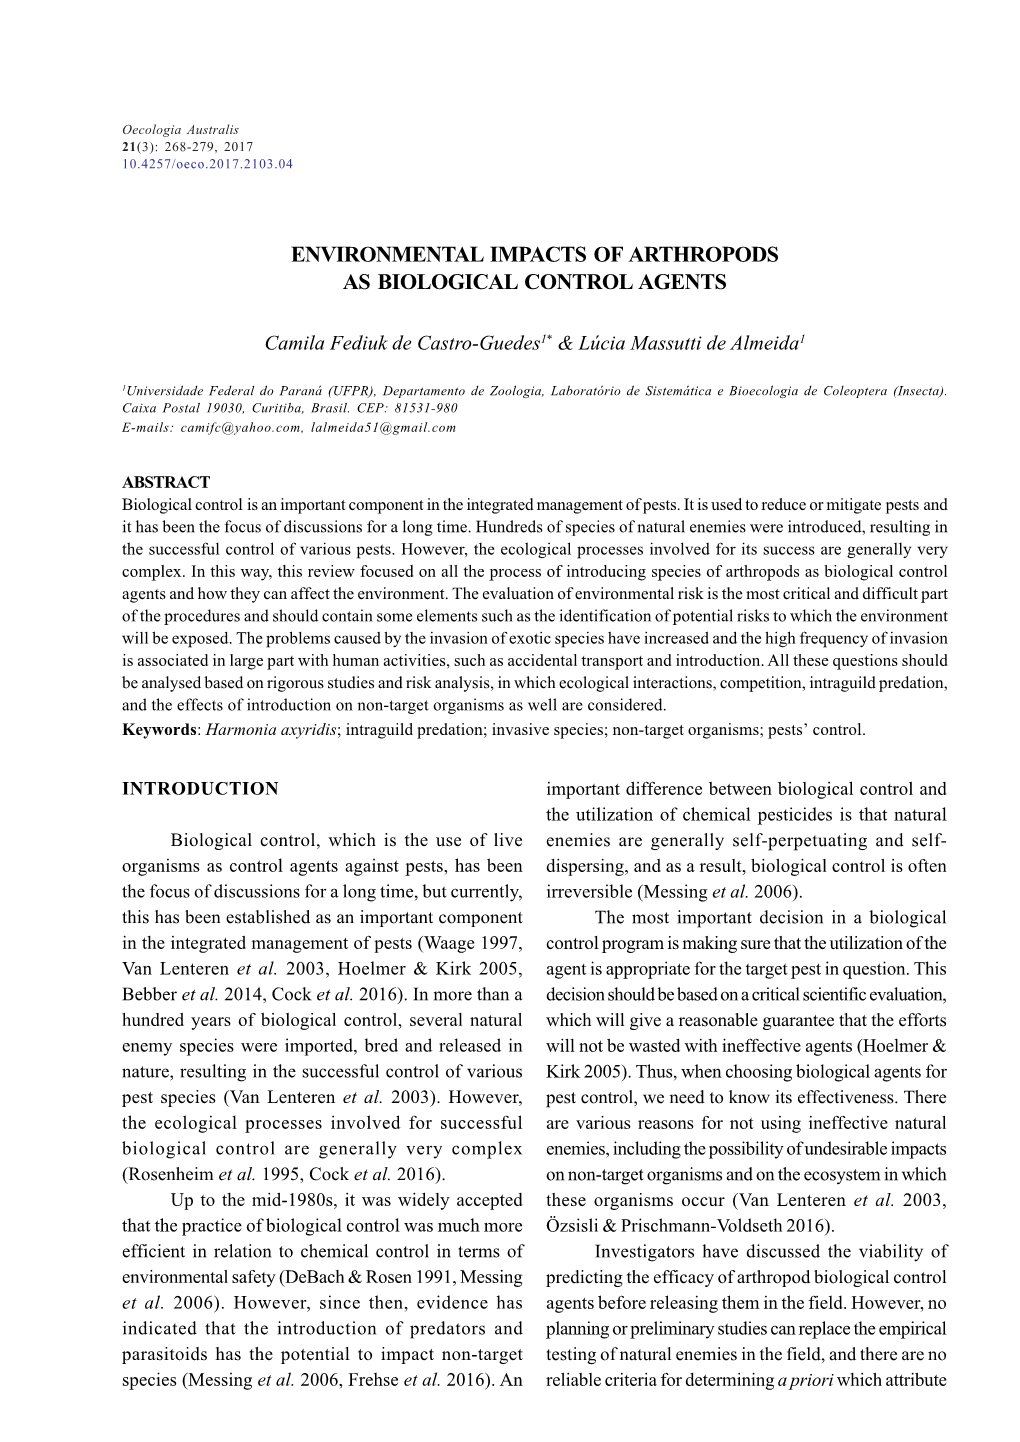 Environmental Impacts of Arthropods As Biological Control Agents